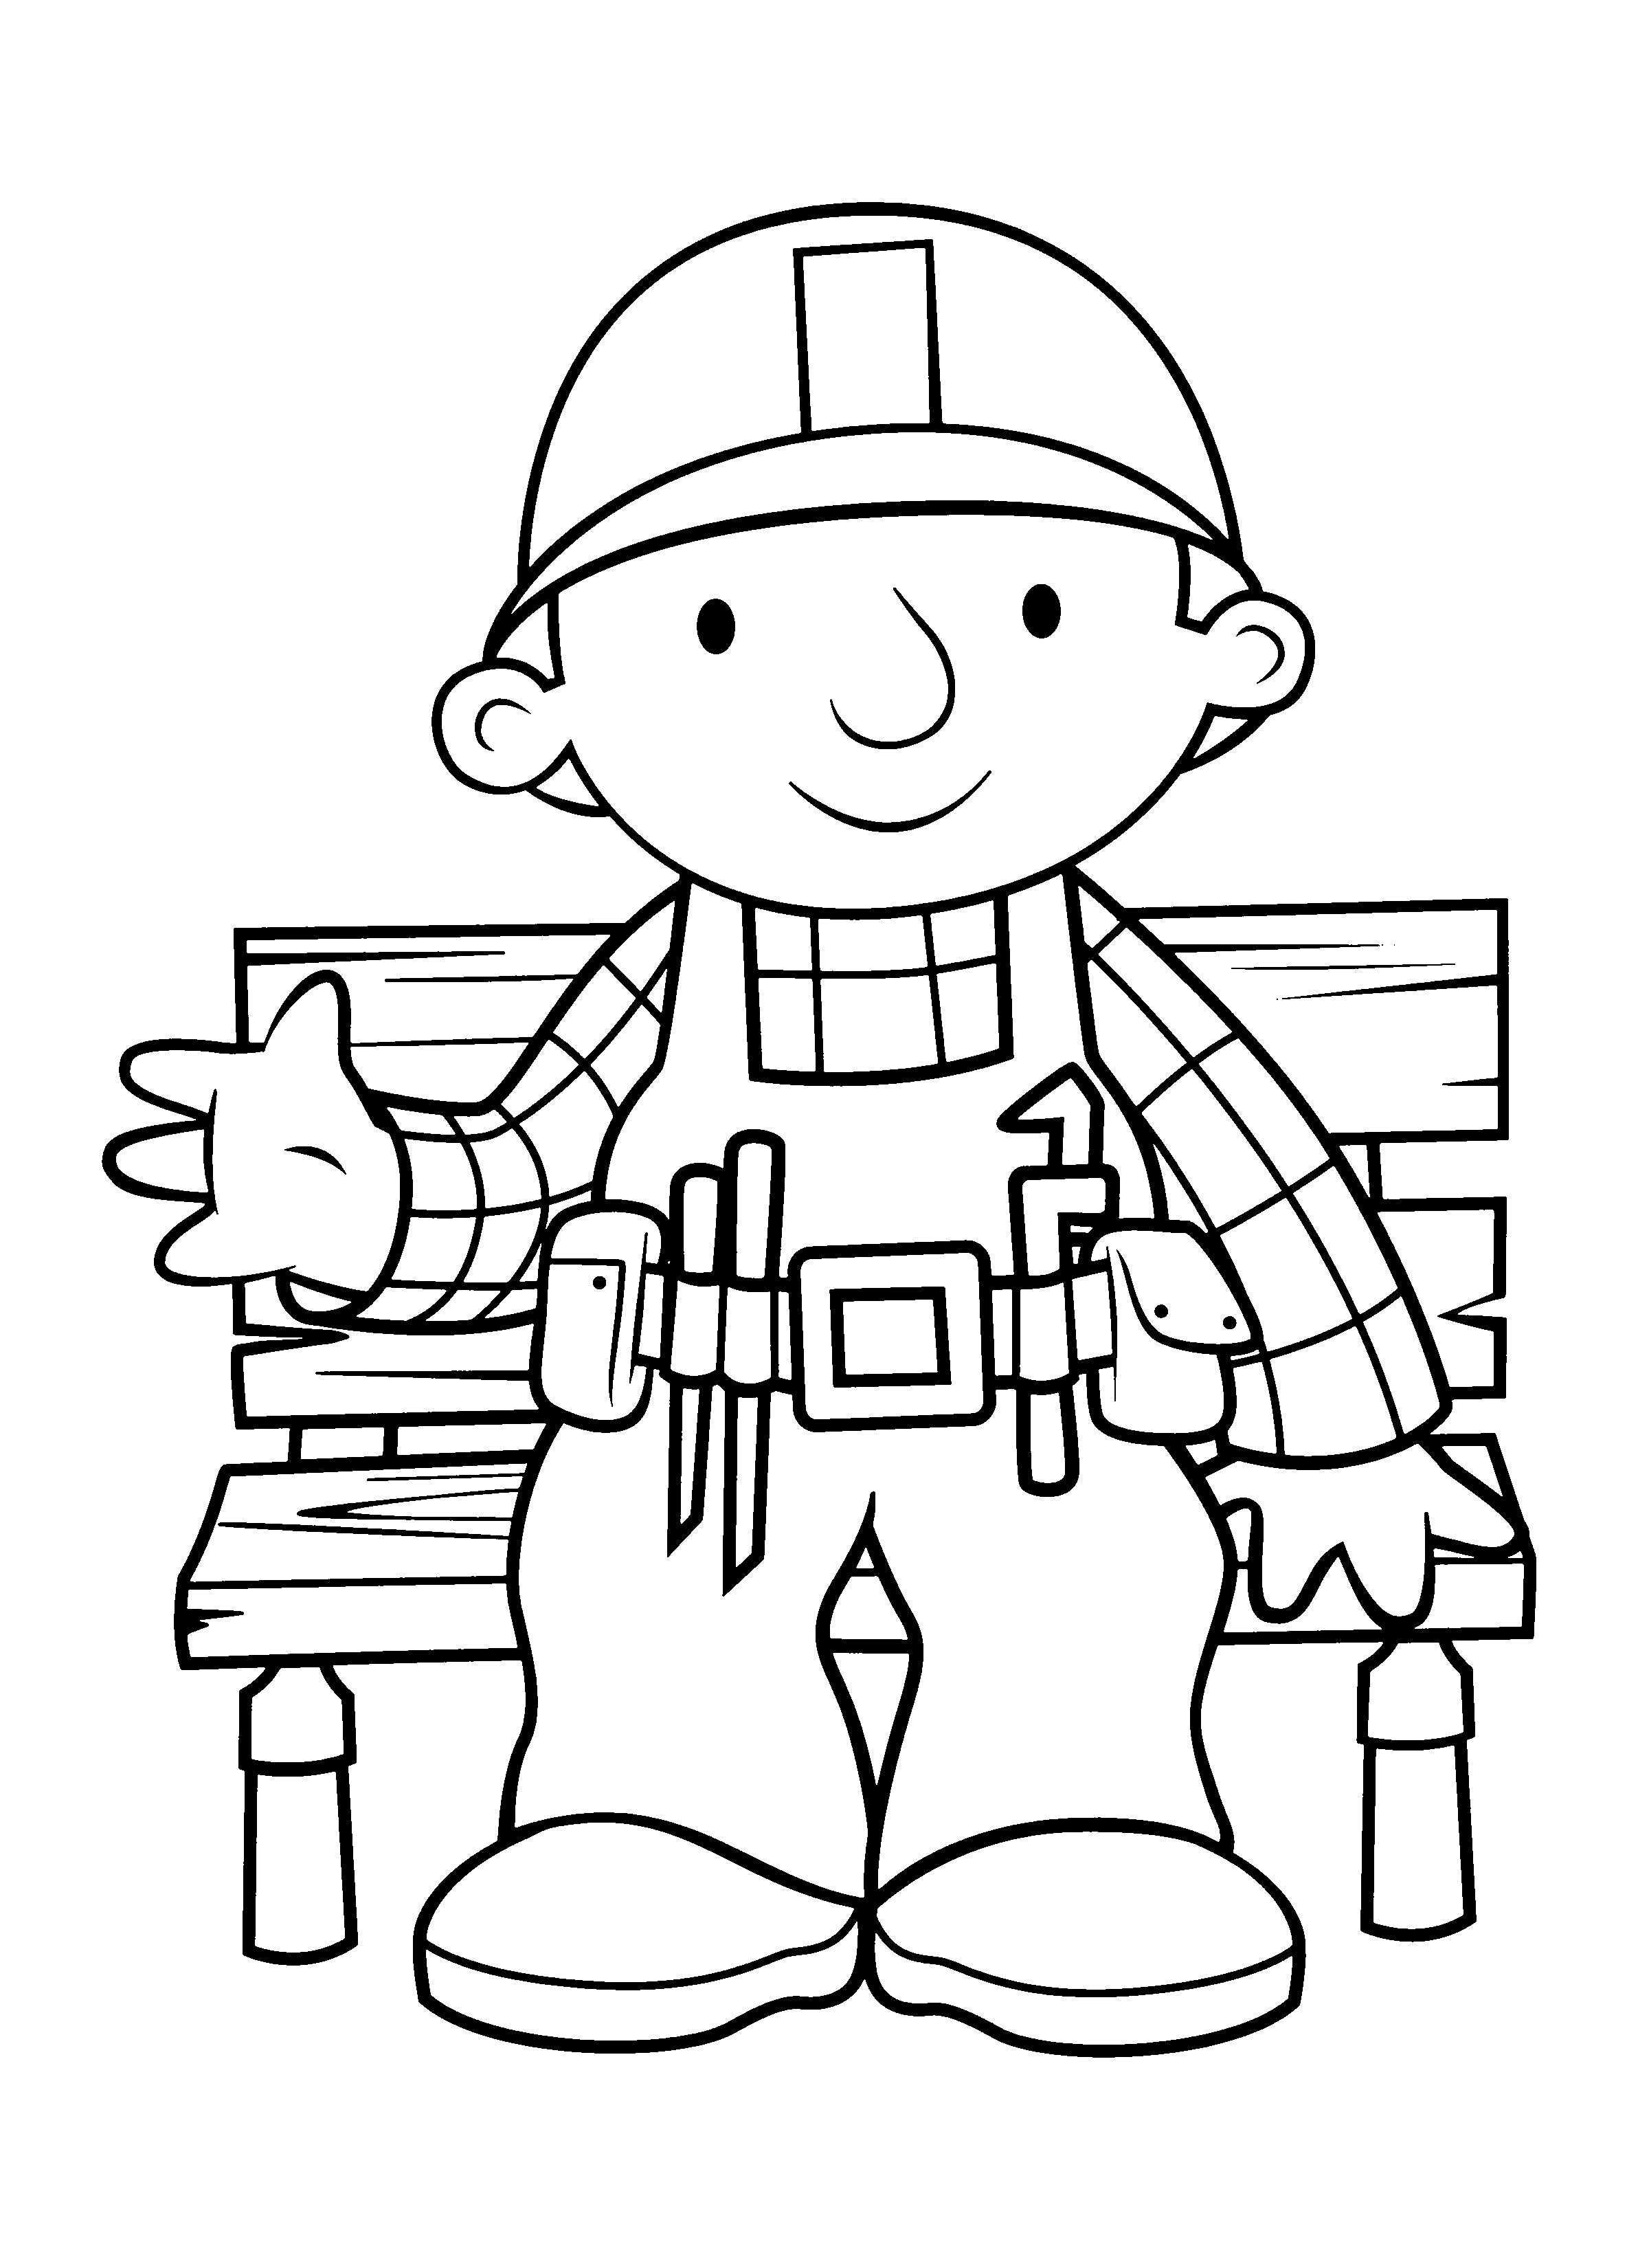 animated-coloring-pages-bob-the-builder-image-0069